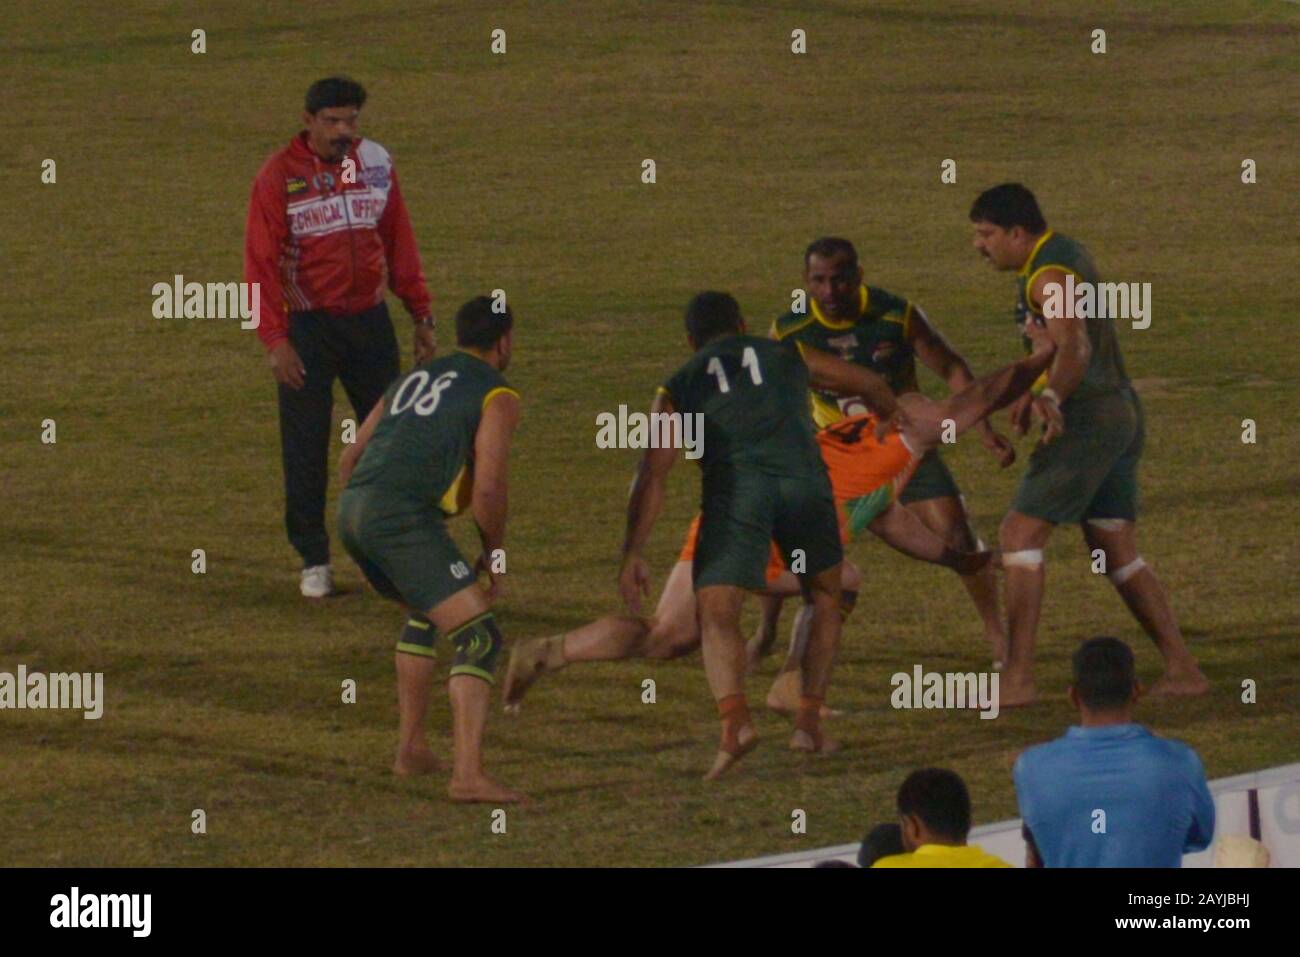 Lahore, Pakistan. 15th Feb, 2020. Kabaddi players seem in action during 2nd Semi final match playing between Pakistan and Iran, as Pakistan Kabaddi team win semi final match by 52-30 during Kabaddi World Cup 2020 at Punjab Stadium Lahore on February 15, 2020. Kabaddi World Cup 2020 begins in Pakistan. All is set for the 'Kabaddi World Cup 2020' being hosted in three cities Lahore, Faisalabad and Gujrat from February 09 to 16 February. Respectively the event is jointly organized by Punjab government, Sports Board Punjab (SBP) and Pakistan Kabaddi Federation (PKF). Credit: Pacific Press Agency/A Stock Photo